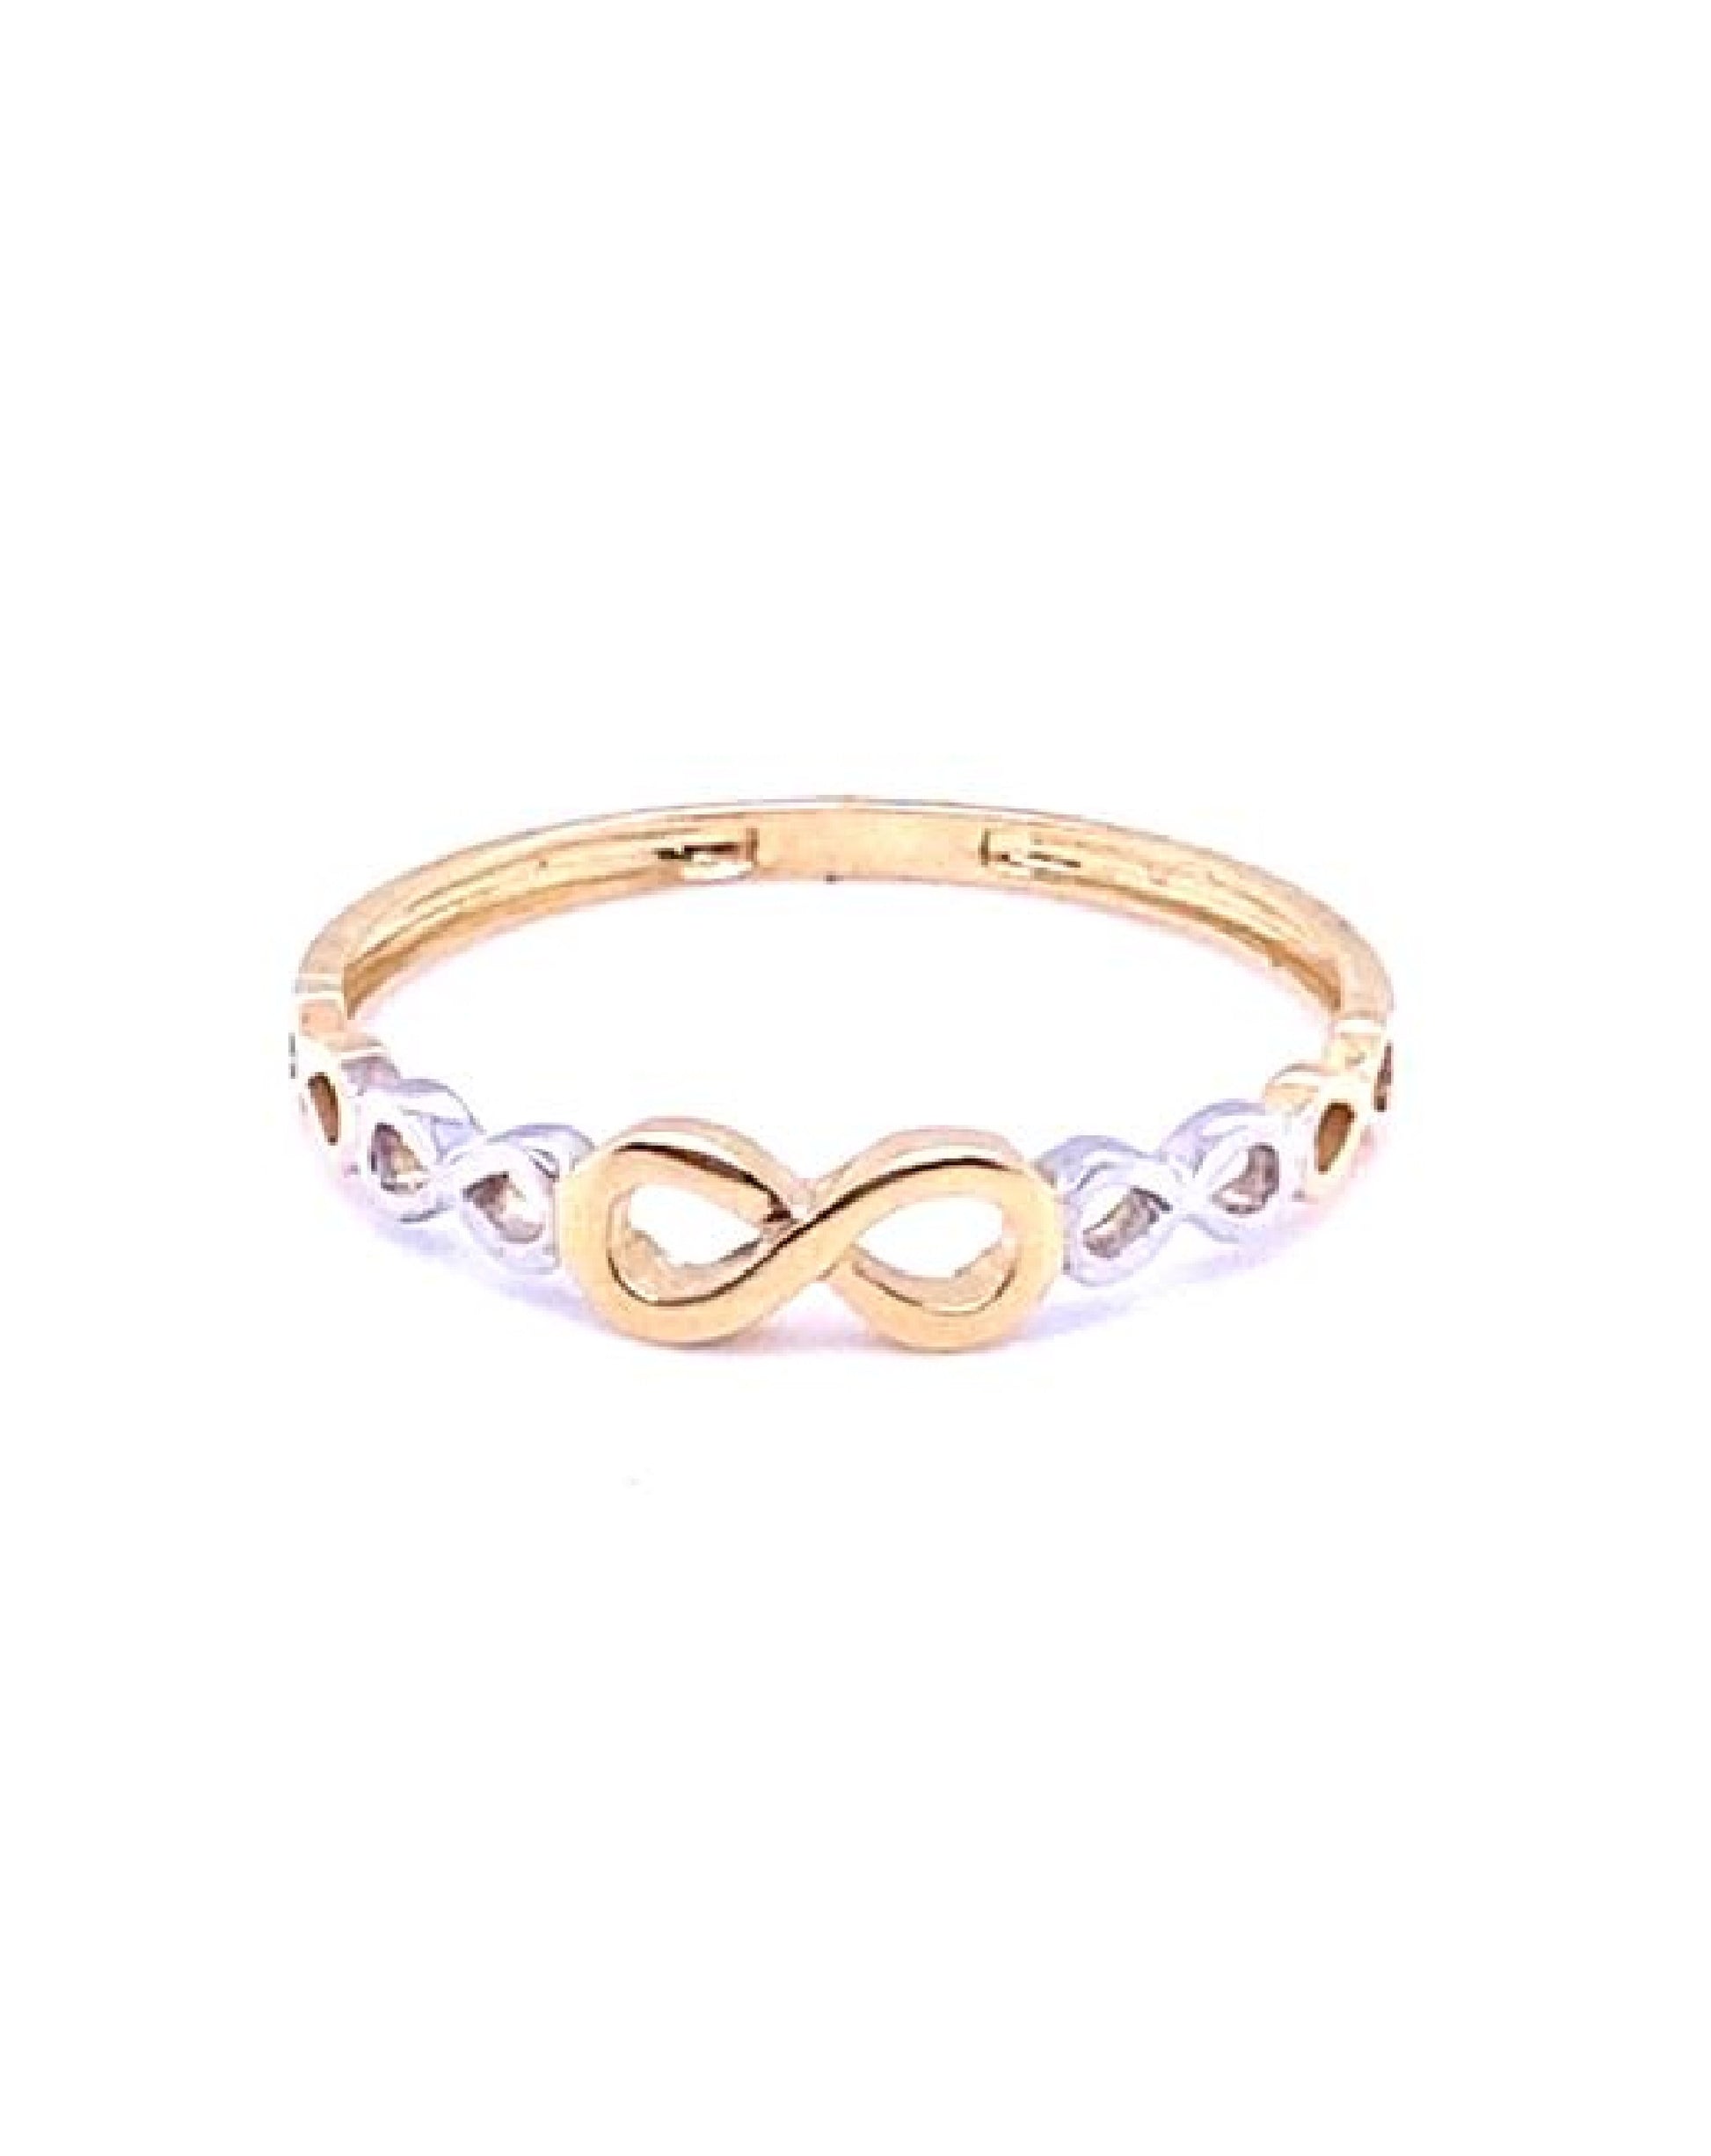 Gold 18KT Yellow Gold/White Gold 2 Tone White Sapphire Infinity Ring Jewelry